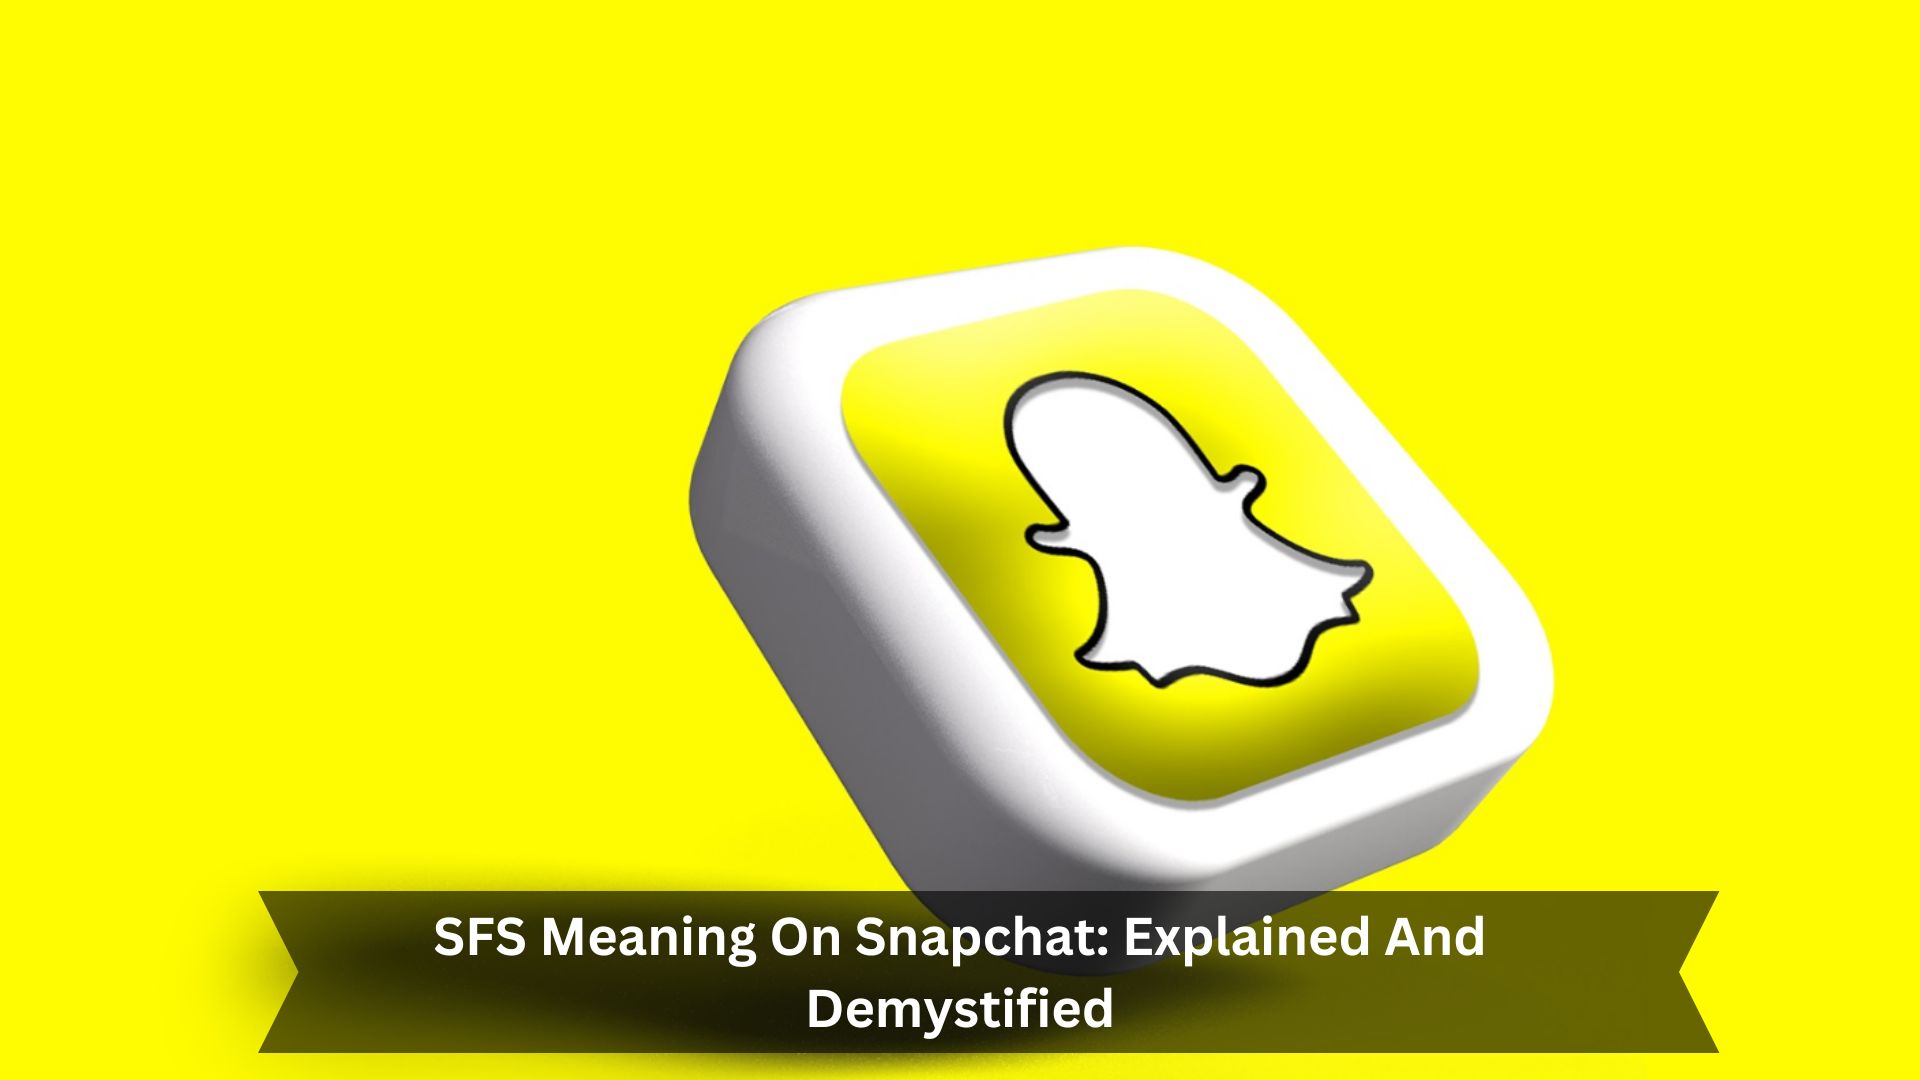 SFS Meaning On Snapchat Explained And Demystified